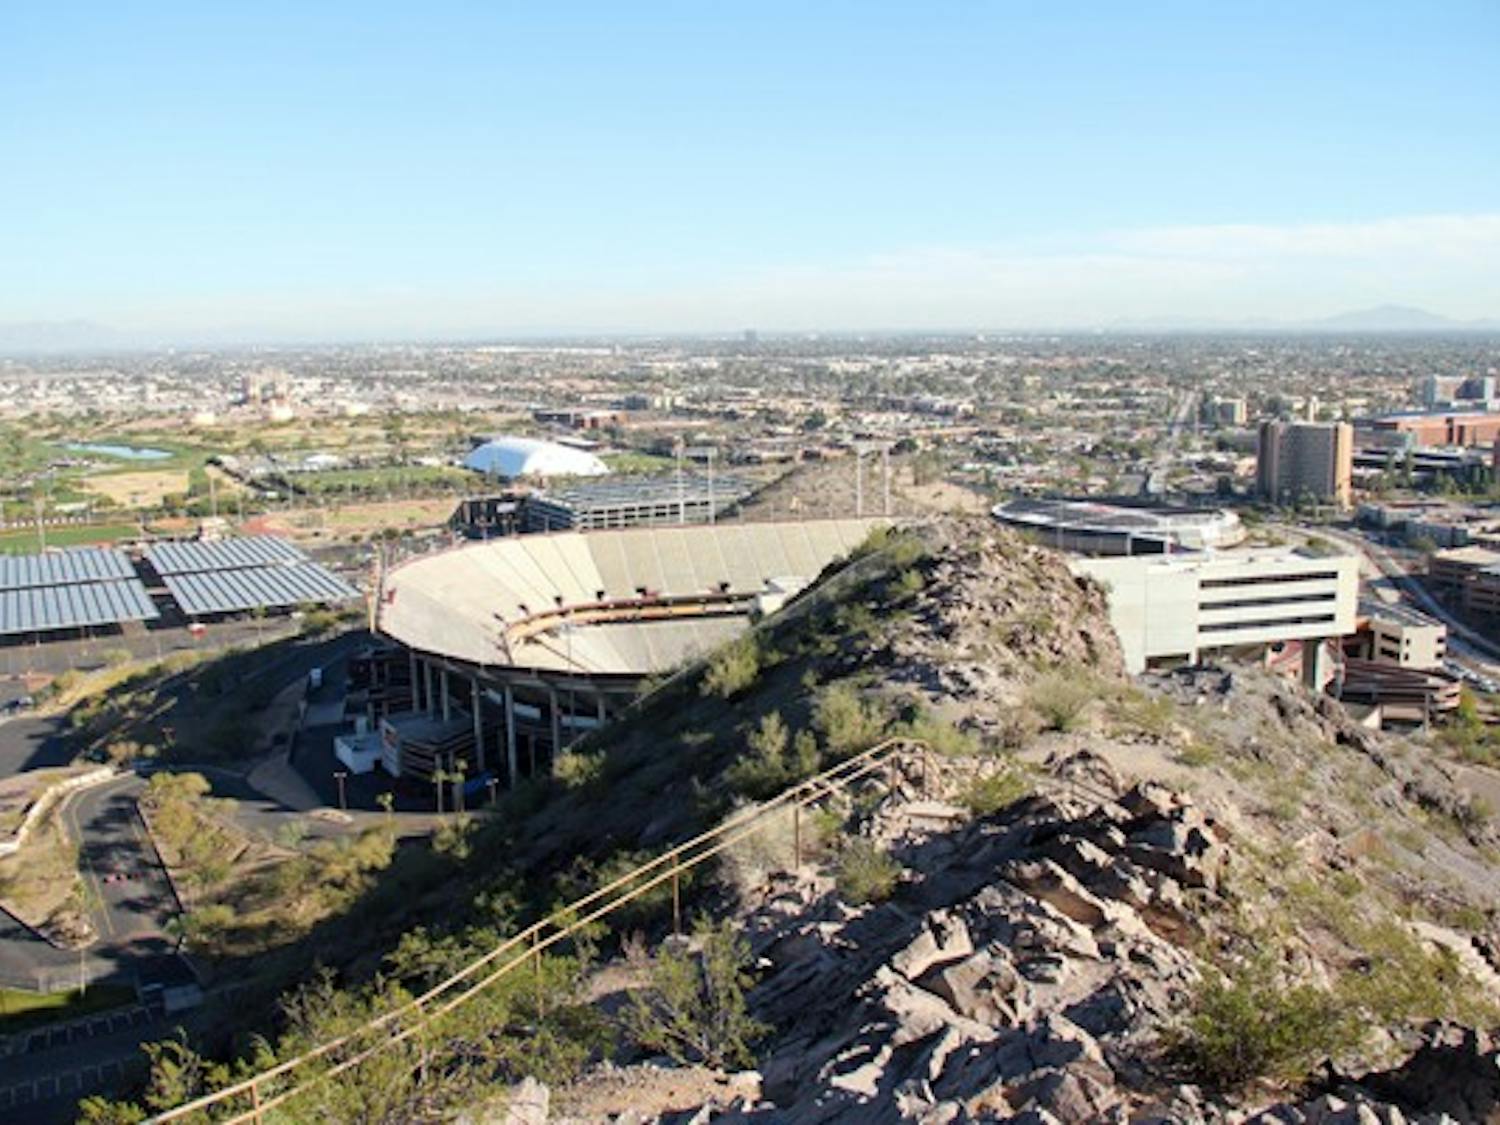 An empty Sun Devil Stadium following football season is seen from the top of "A" Mountain in Tempe Friday afternoon. (Photo by Diana Lustig)